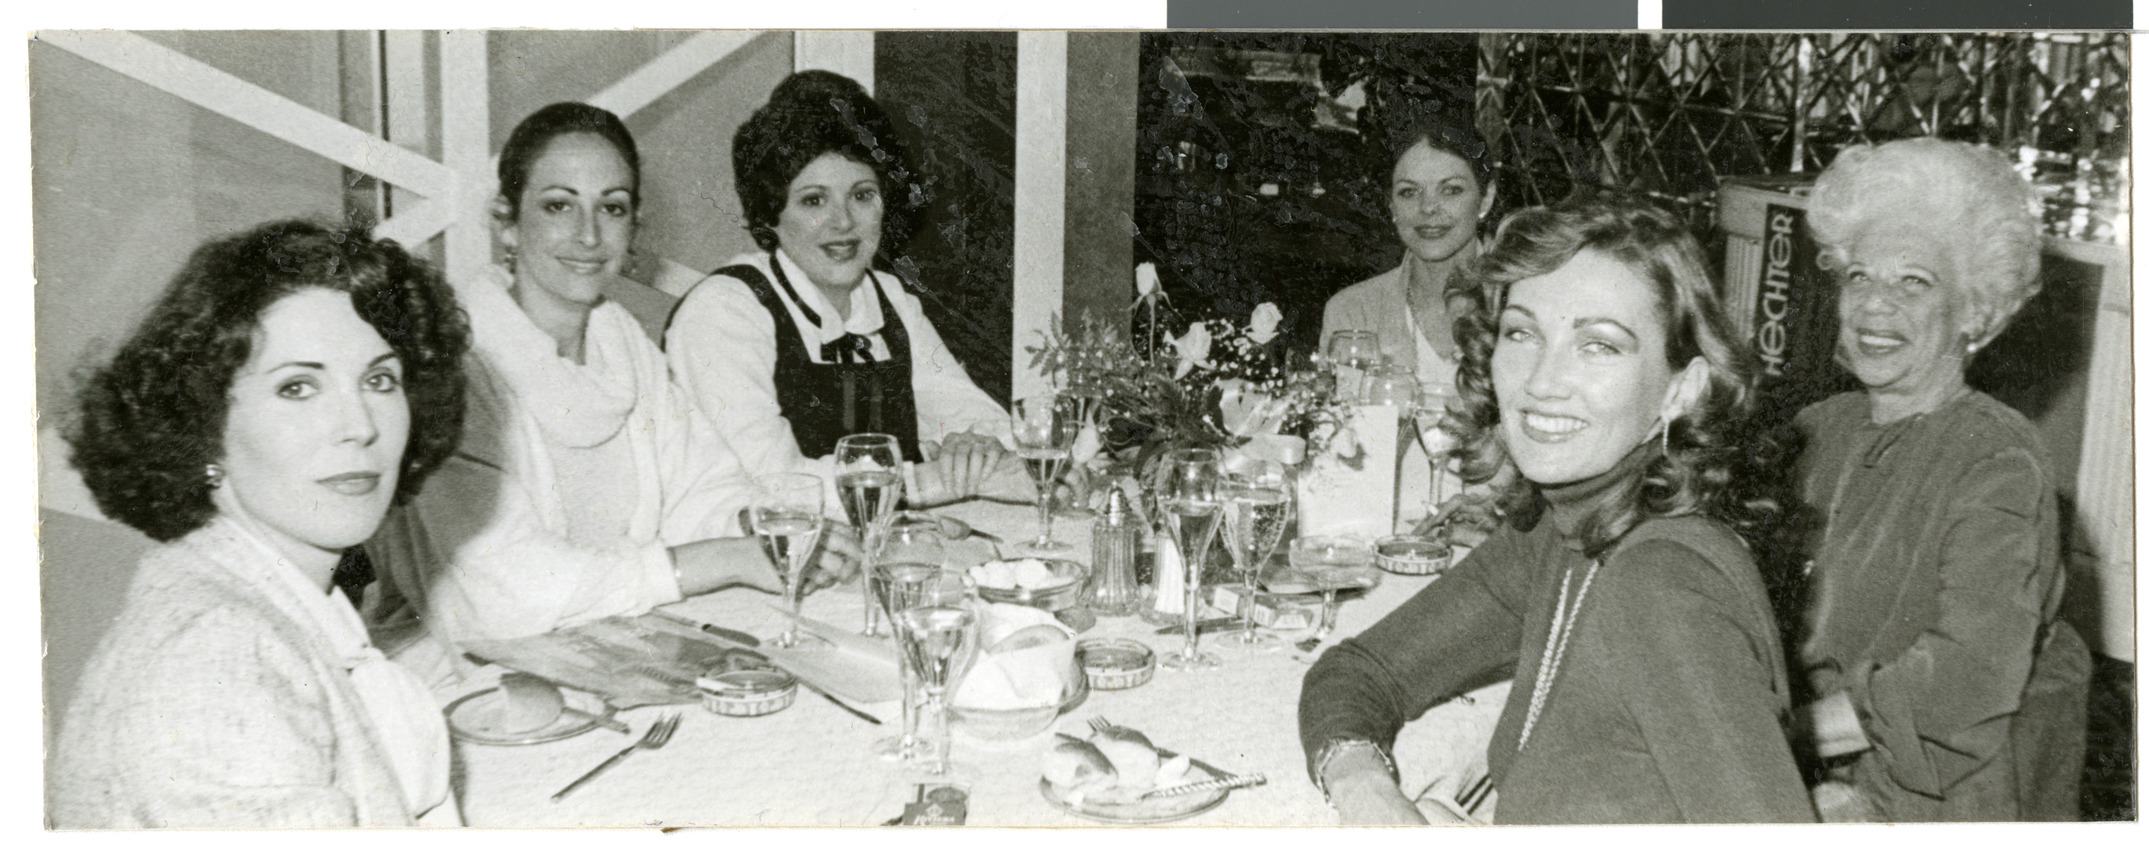 Photographs of Jewish Federation Women's Division Leaders, image 05